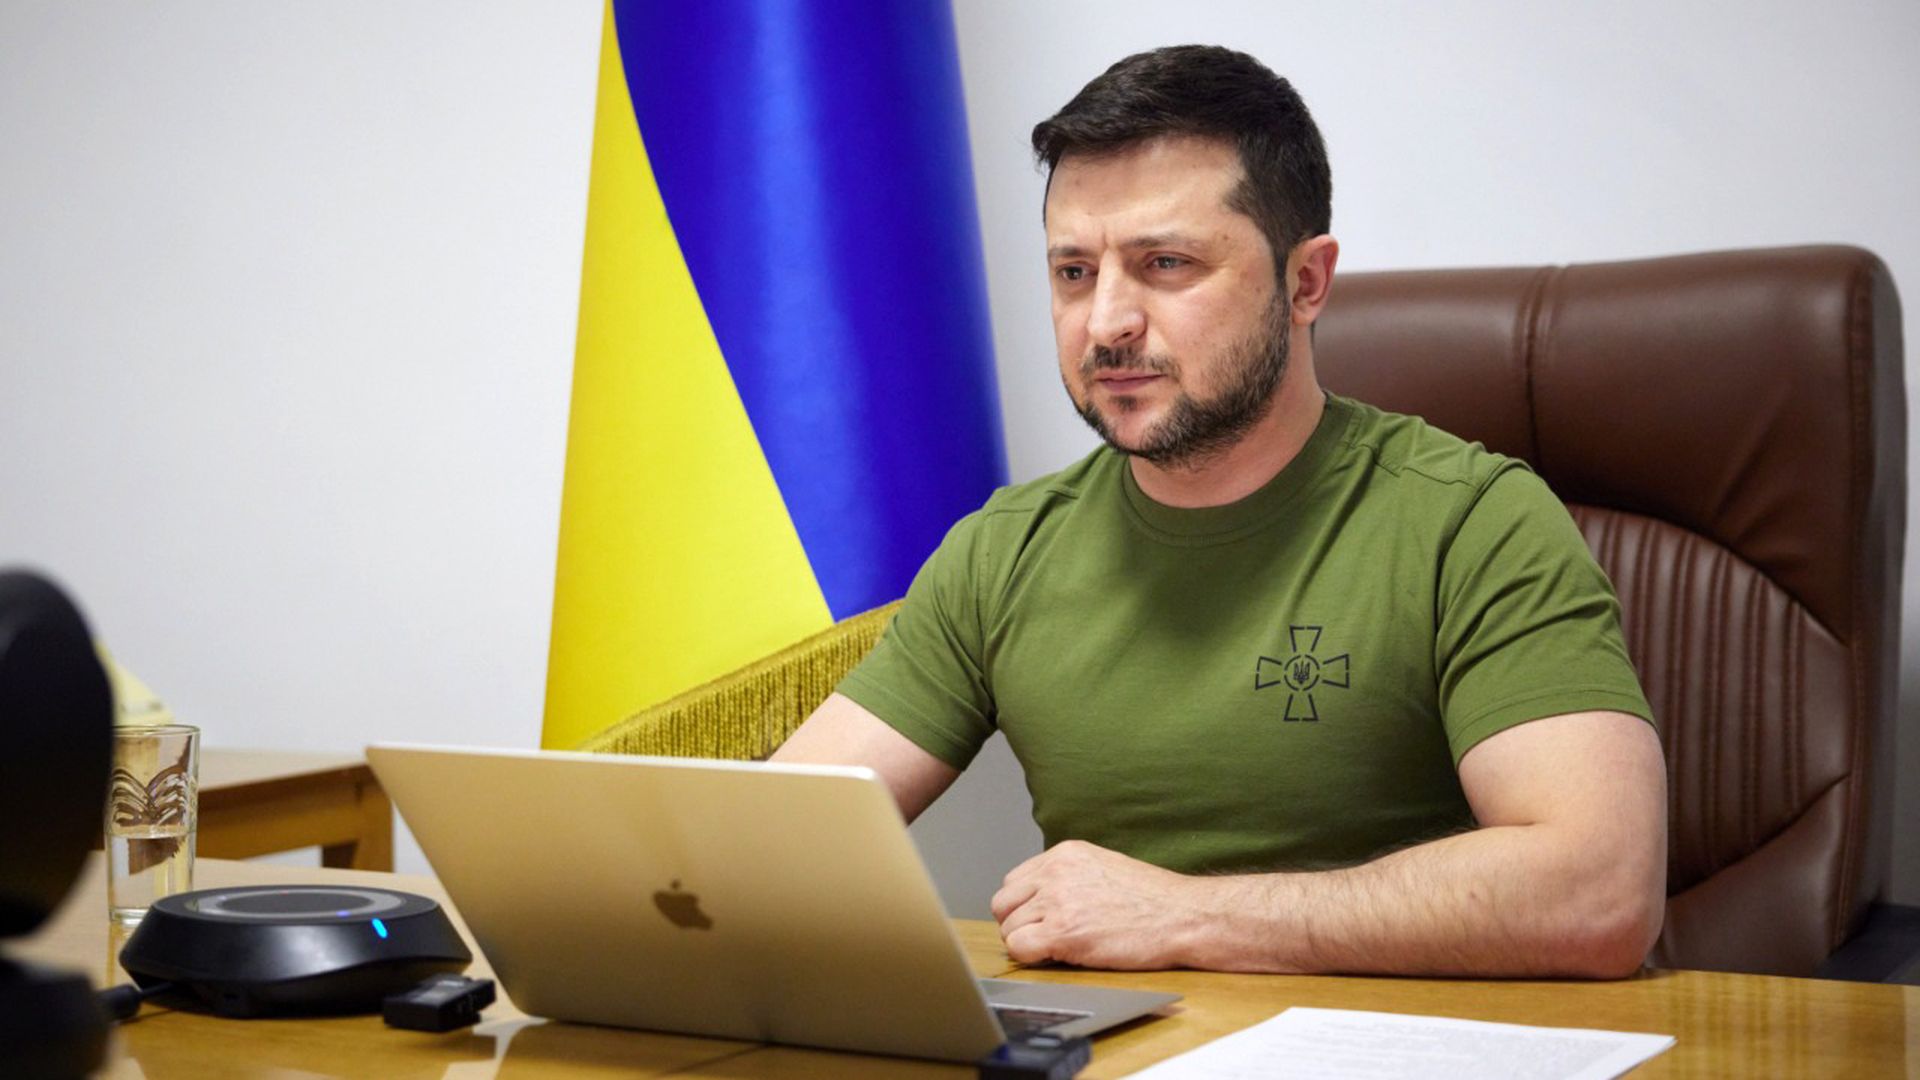 Picture of Zelensky sitting in front of a laptop